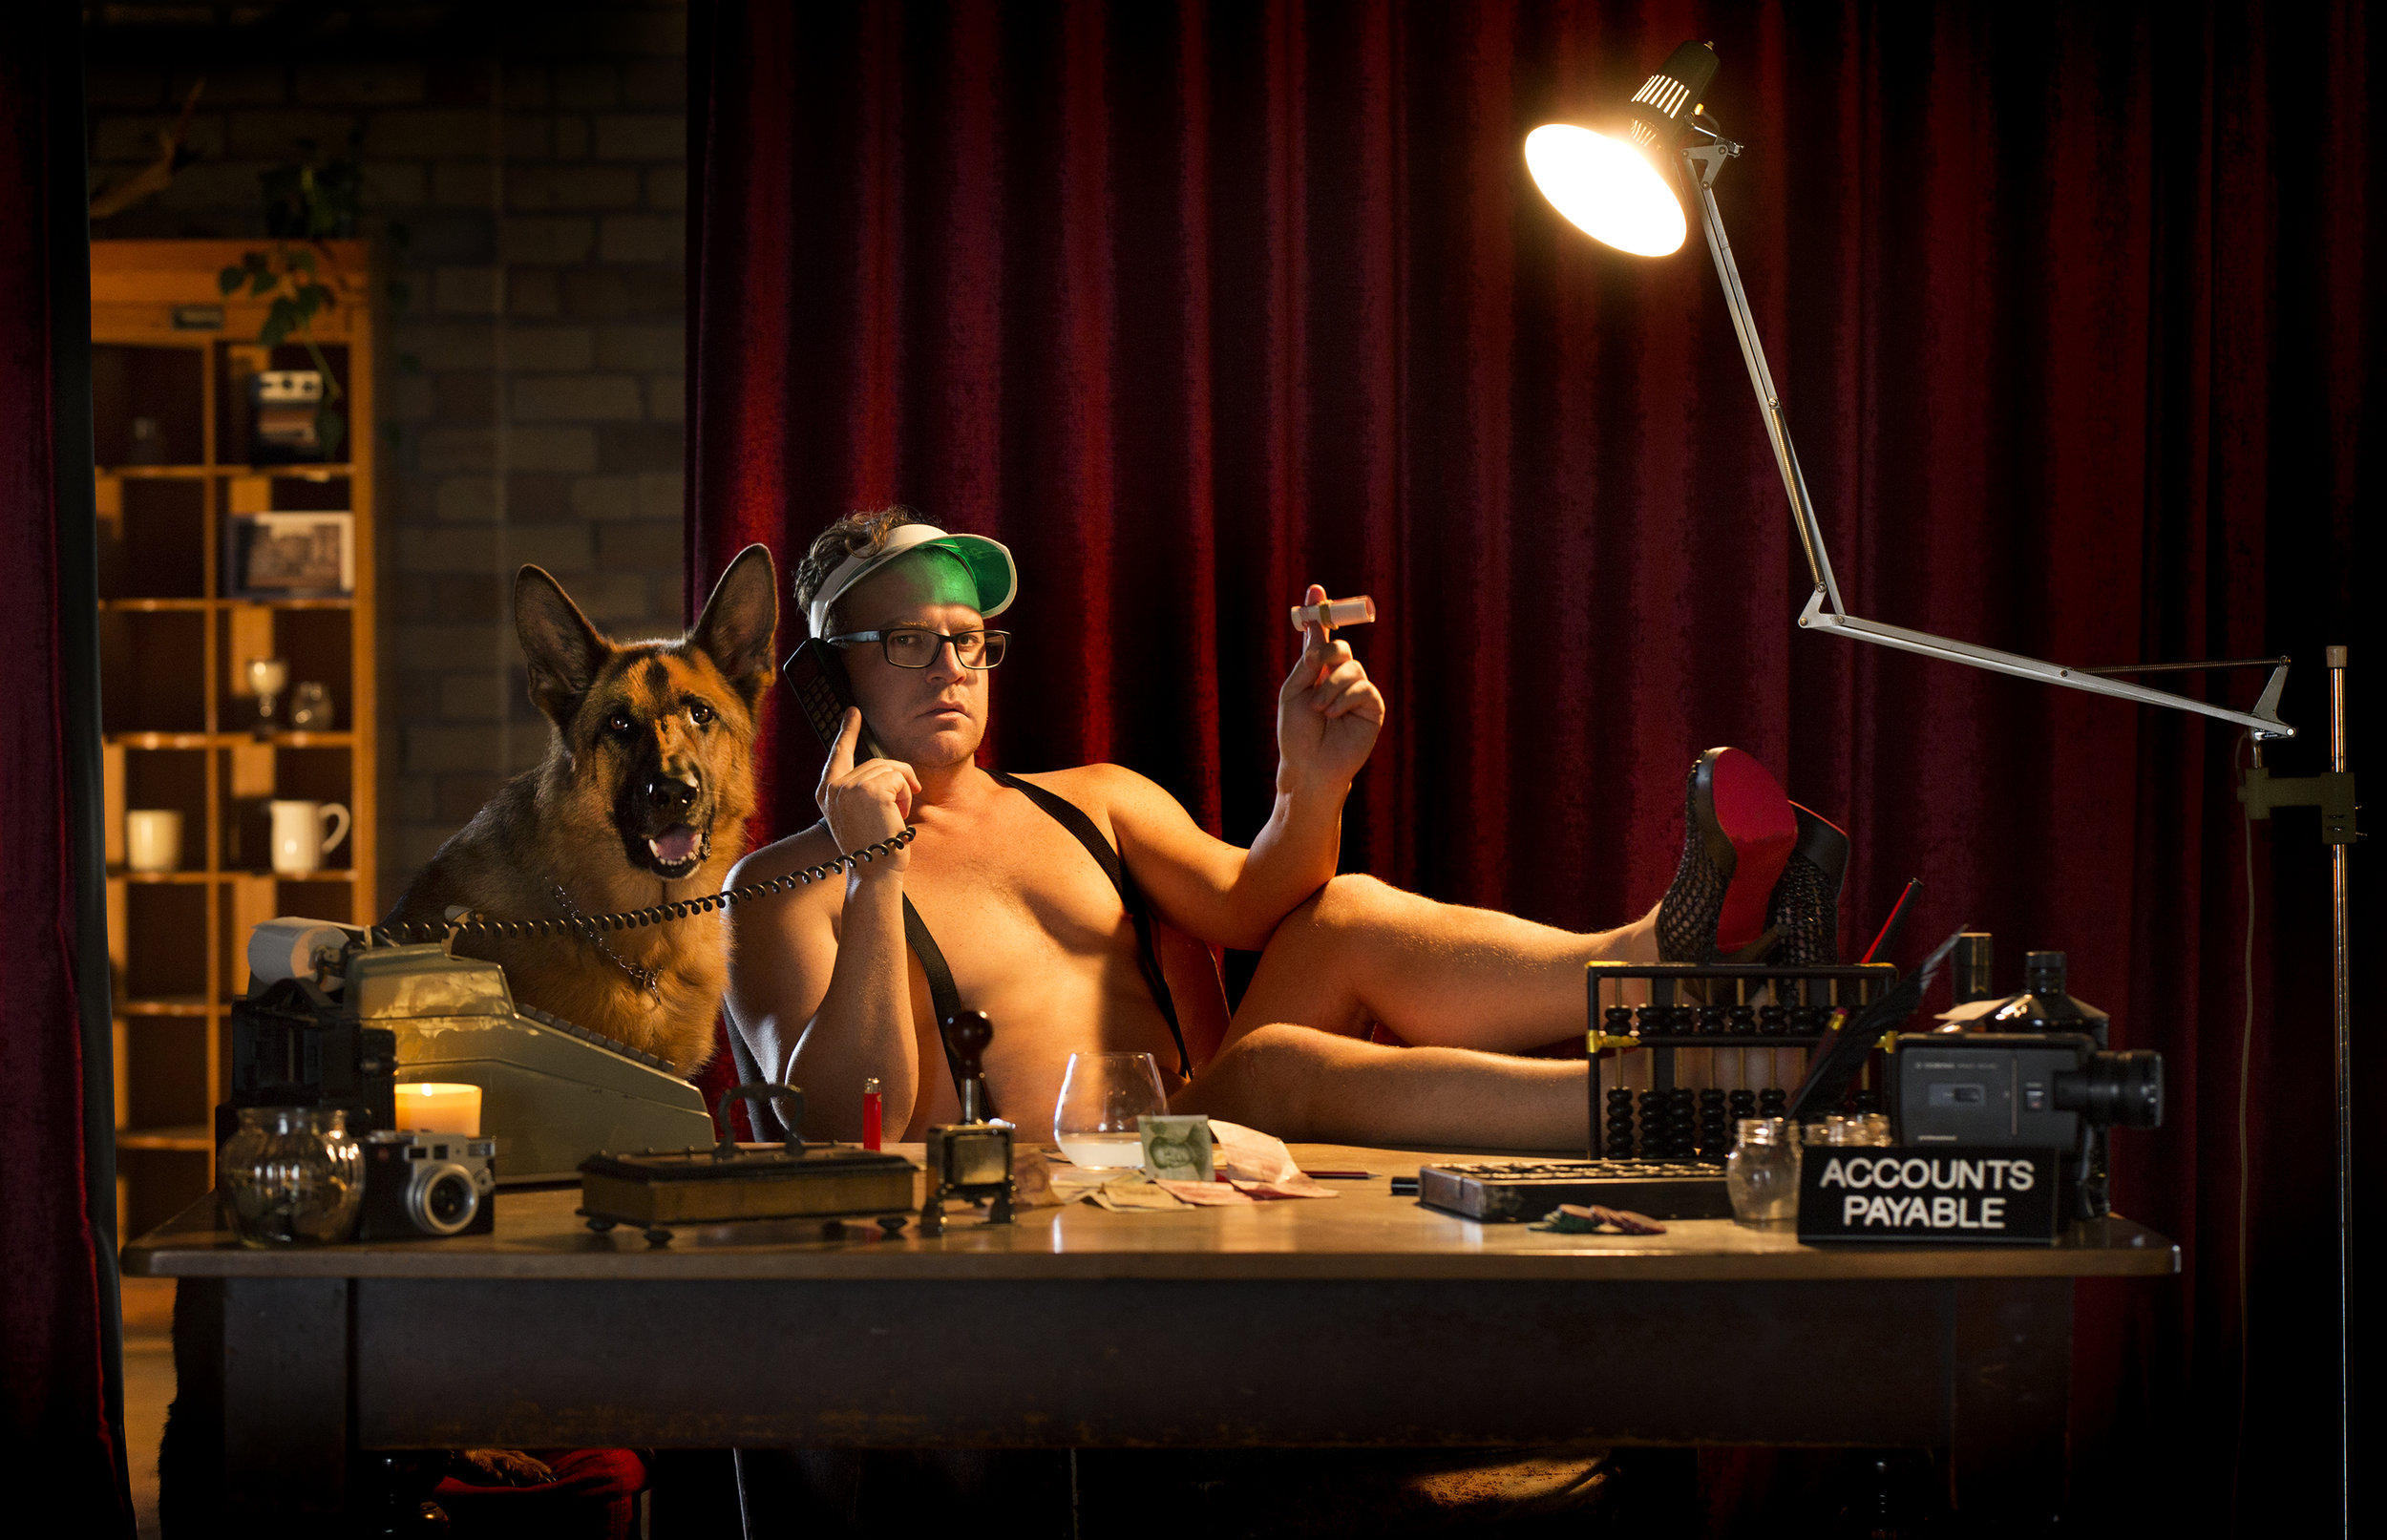 Dan Higgins - Producer - From the Eight Boys and their Pets Calendar